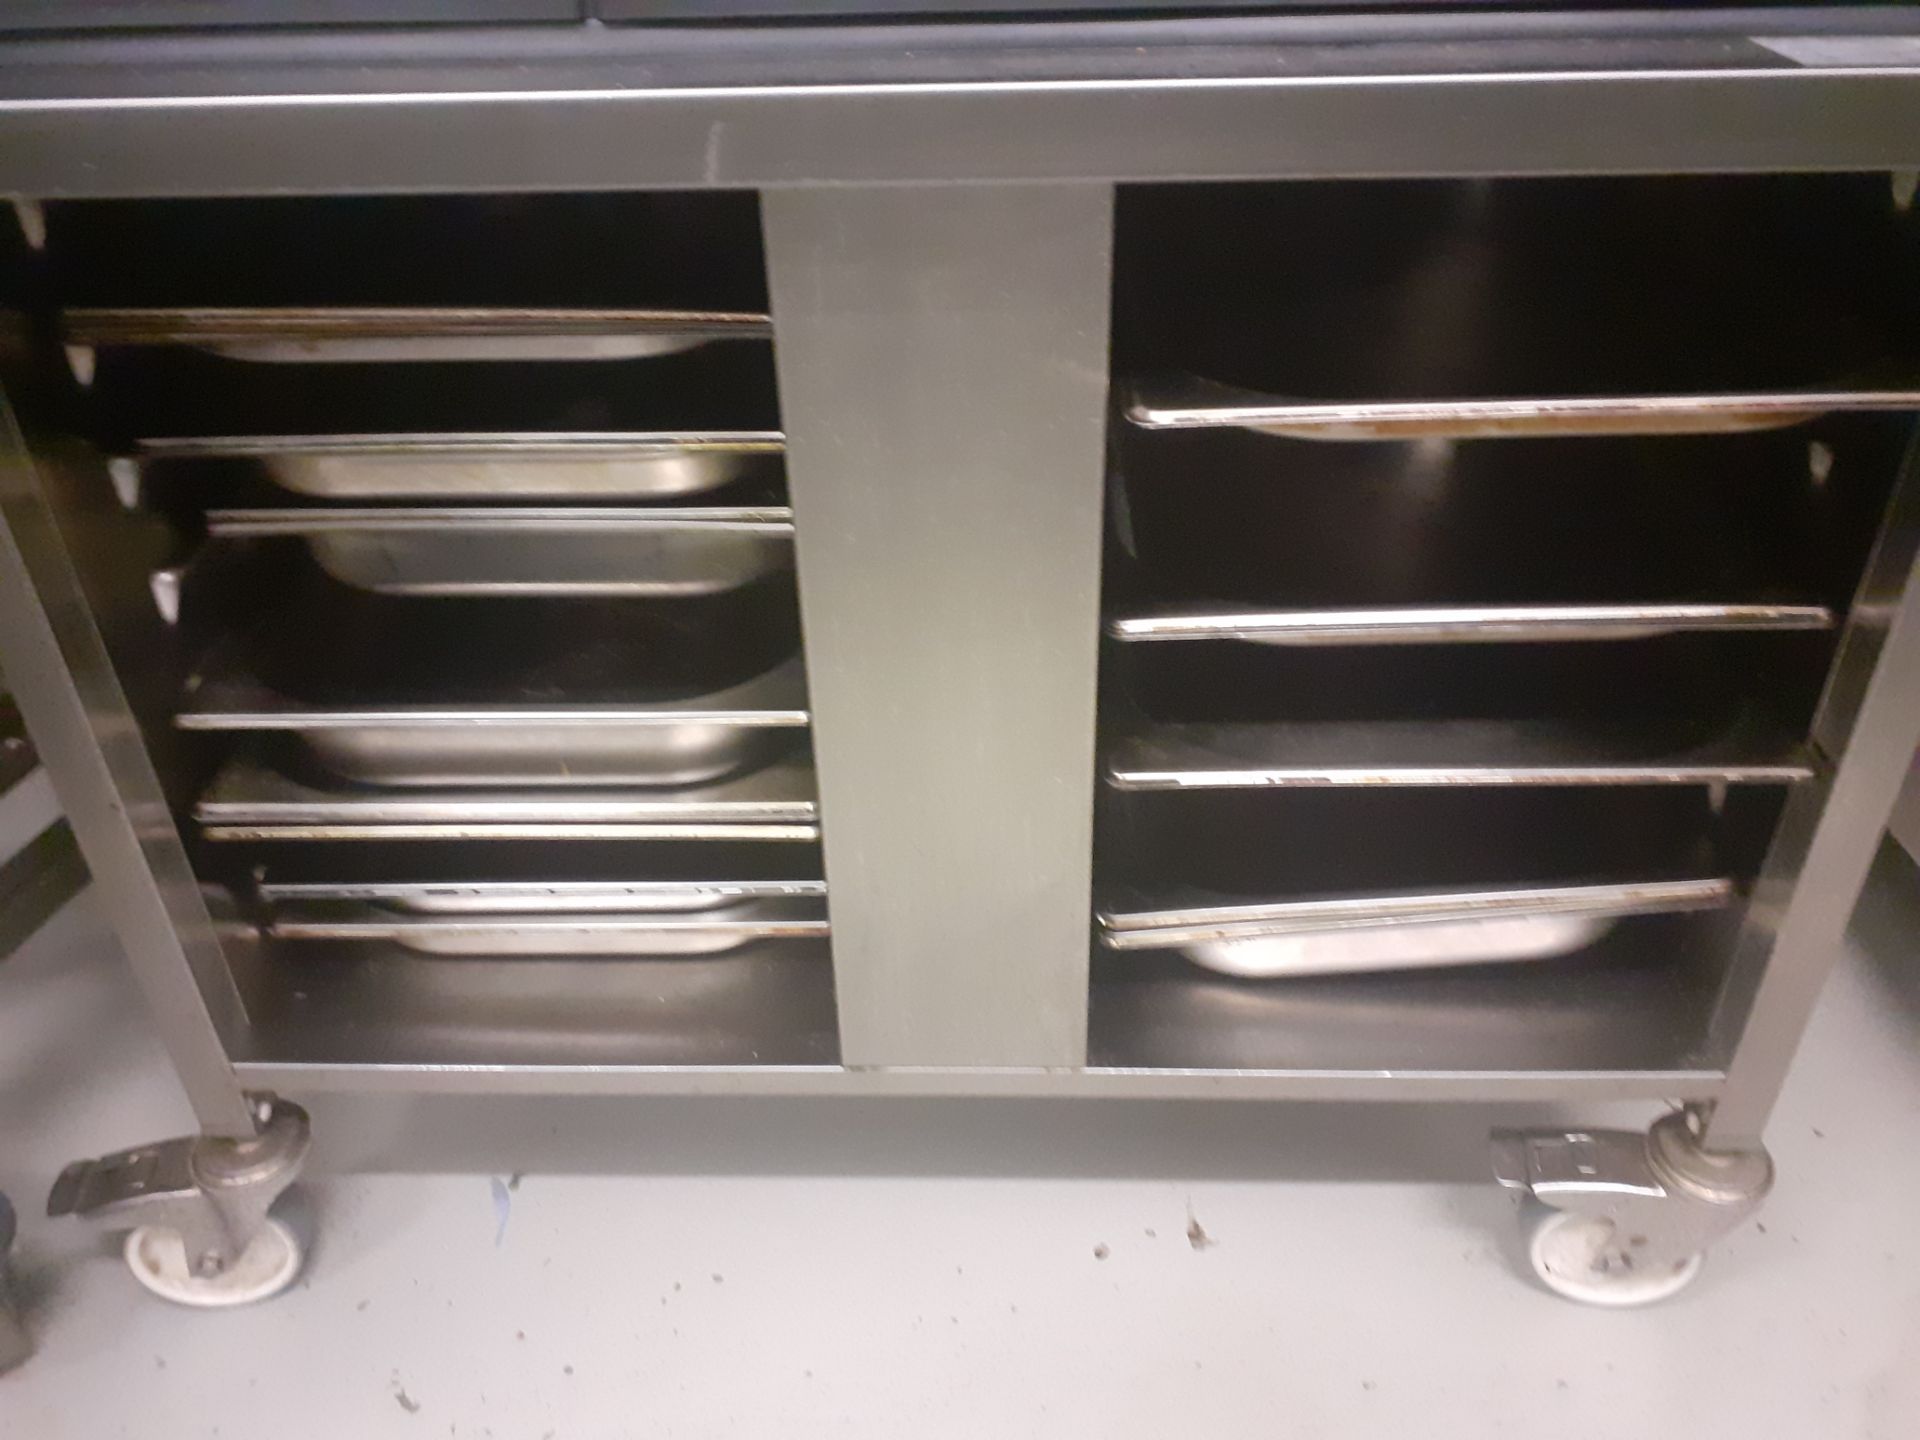 Quantity of Stainless Steel Gastronorm Trays, approx.20